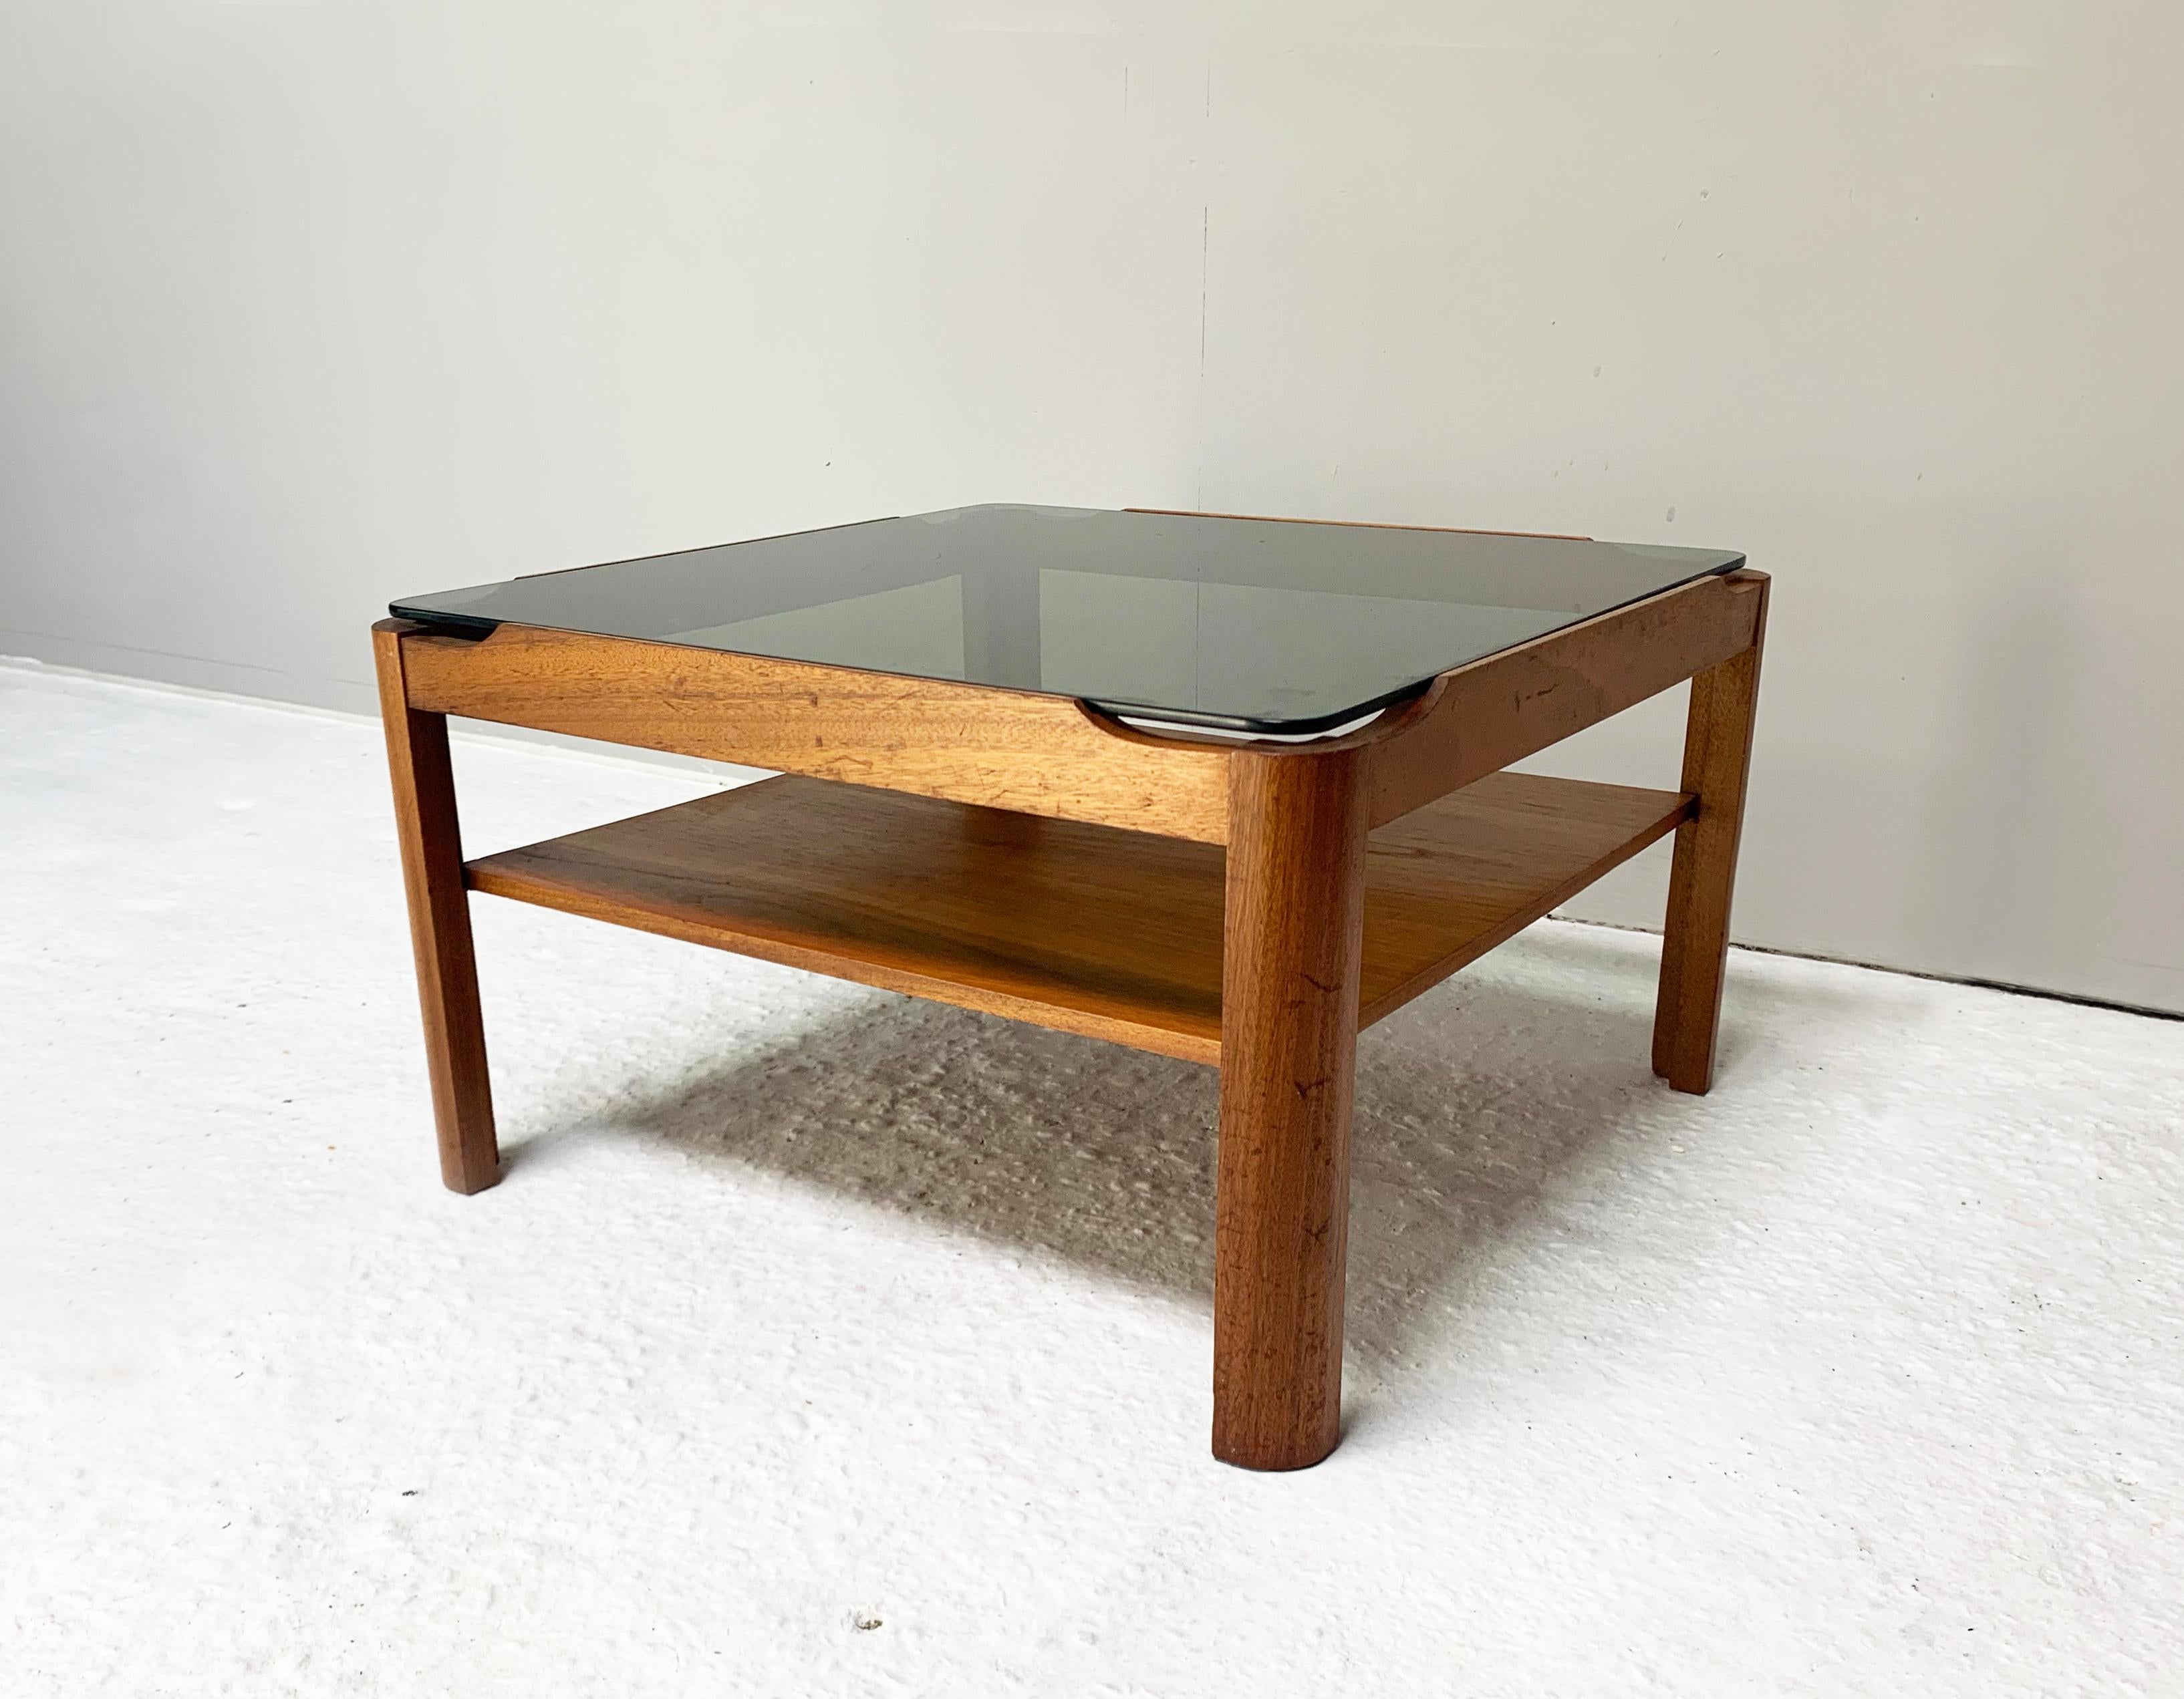 Mid-Century Modern coffee table by respected English maker ‘Myer’. Solid countered teak frame with thick smoked glass insert

Size 
width 61cm x depth 61m x height 35cm

Condition:
Very good mid century condition. Minor signs of wear